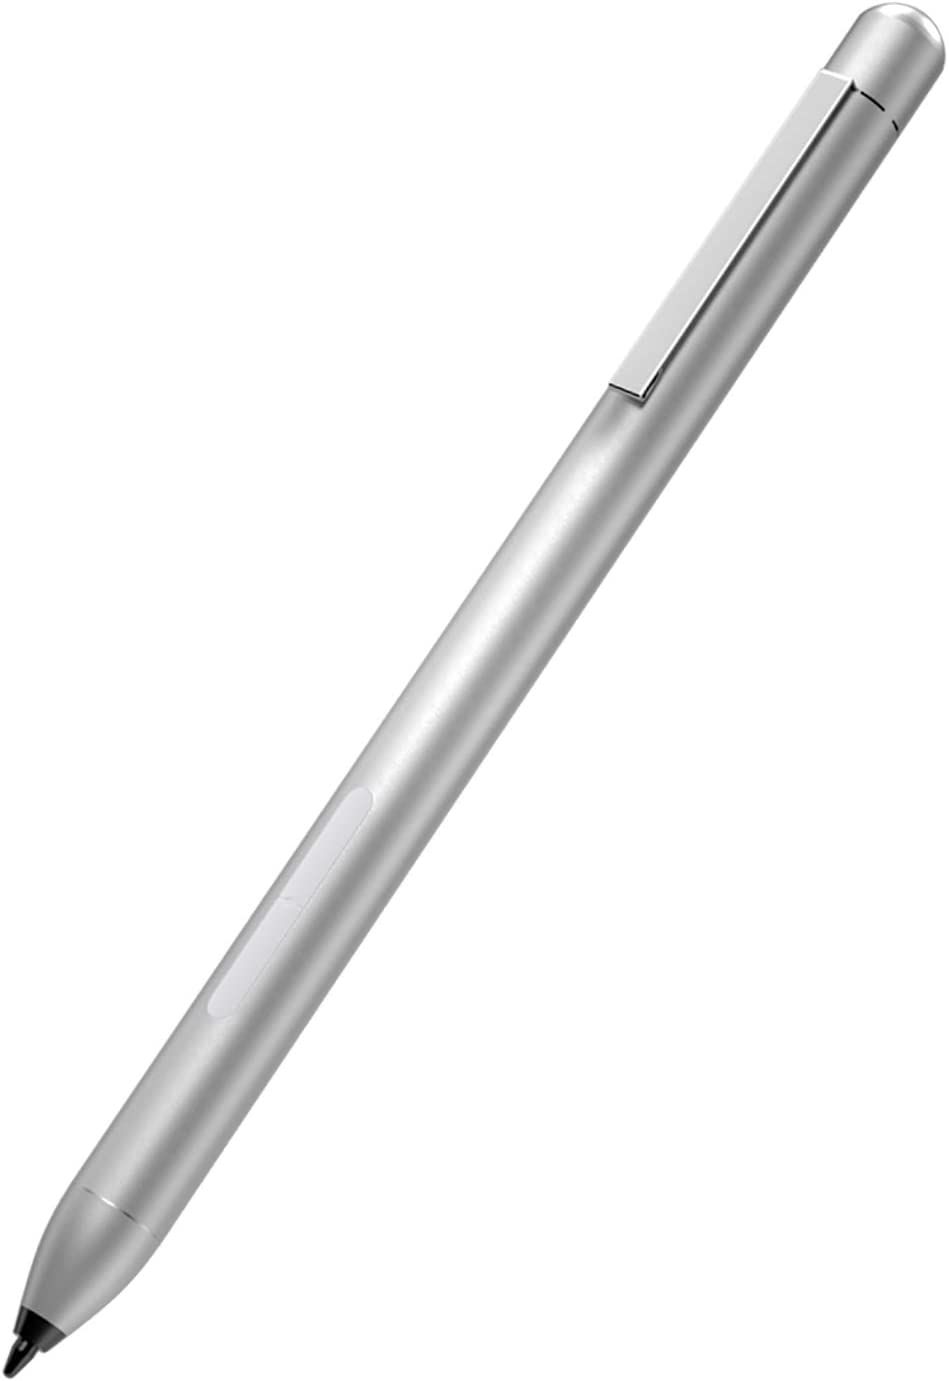 Genuine Stylus Pen for HP Touch Screen Laptop, [...]